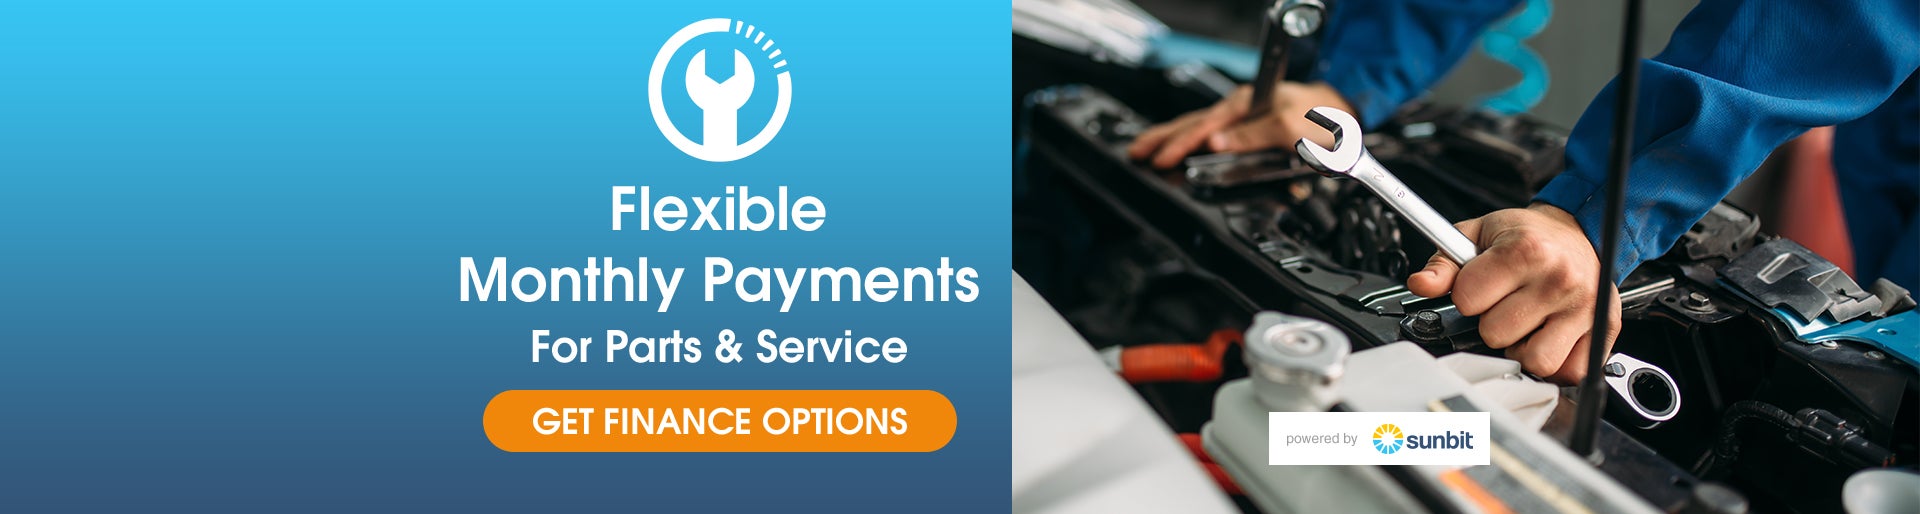 Flexible Monthly Payments for Parts & Service